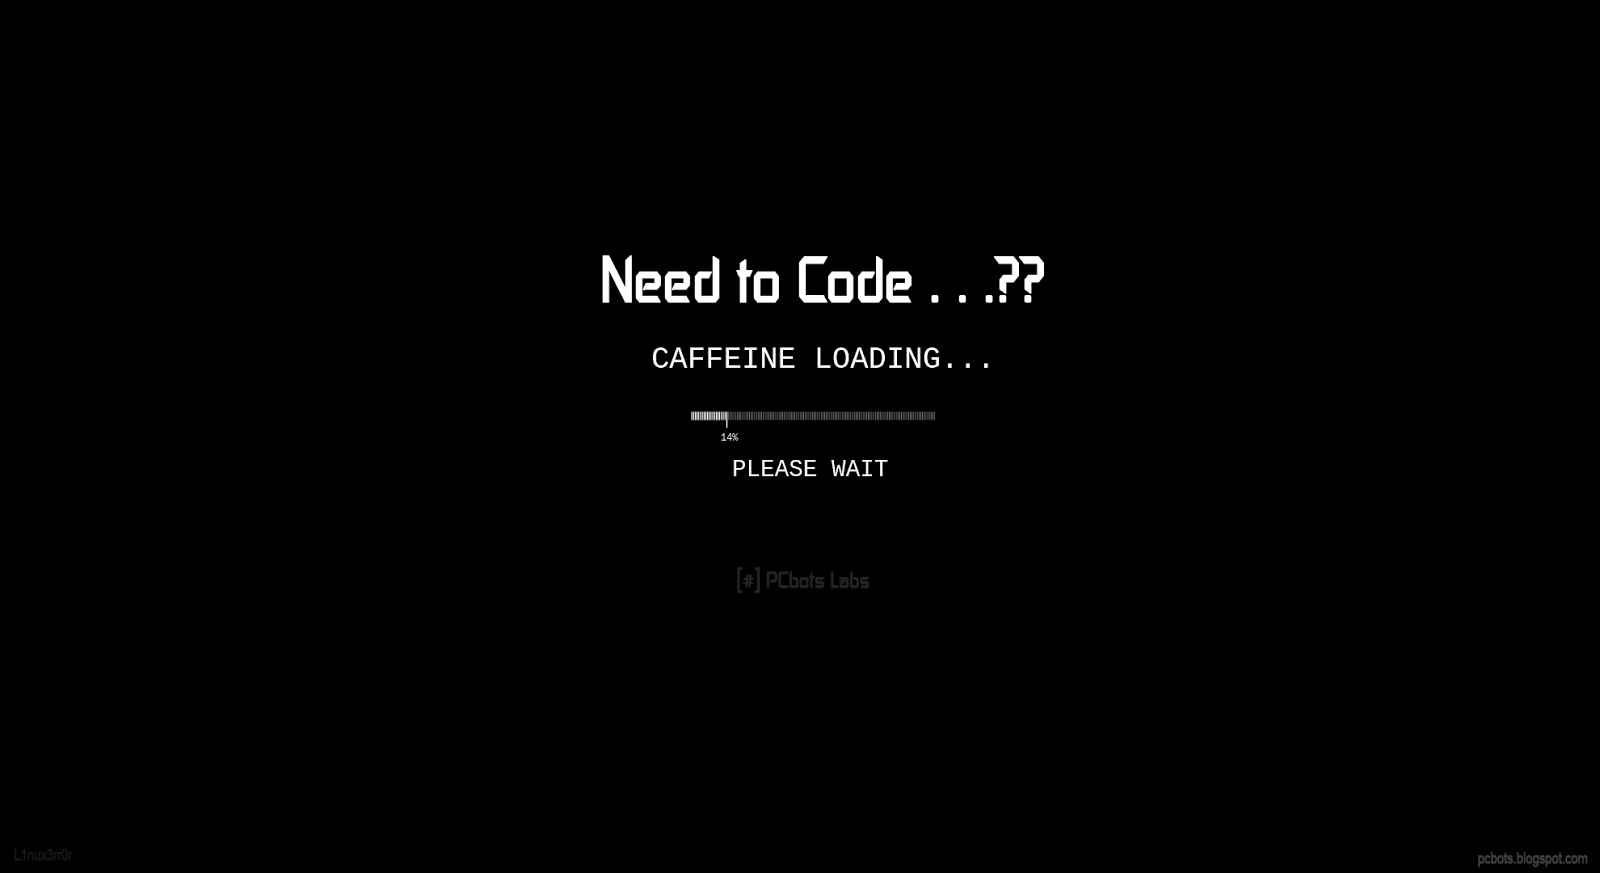 Need Code By PCbots